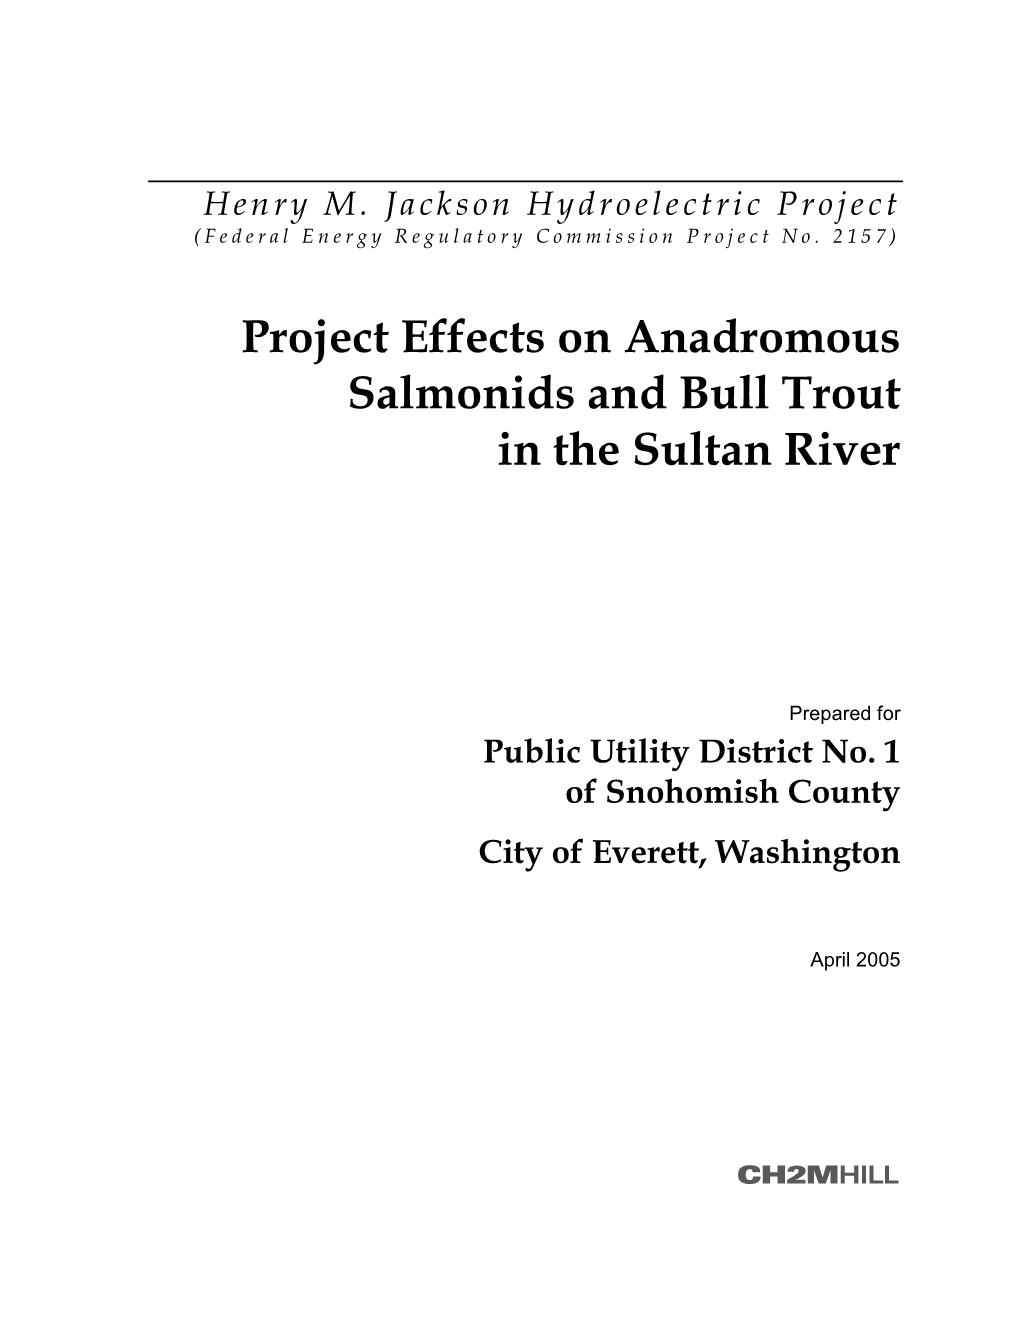 Project Effects on Anadromous Salmonids and Bull Trout in the Sultan River